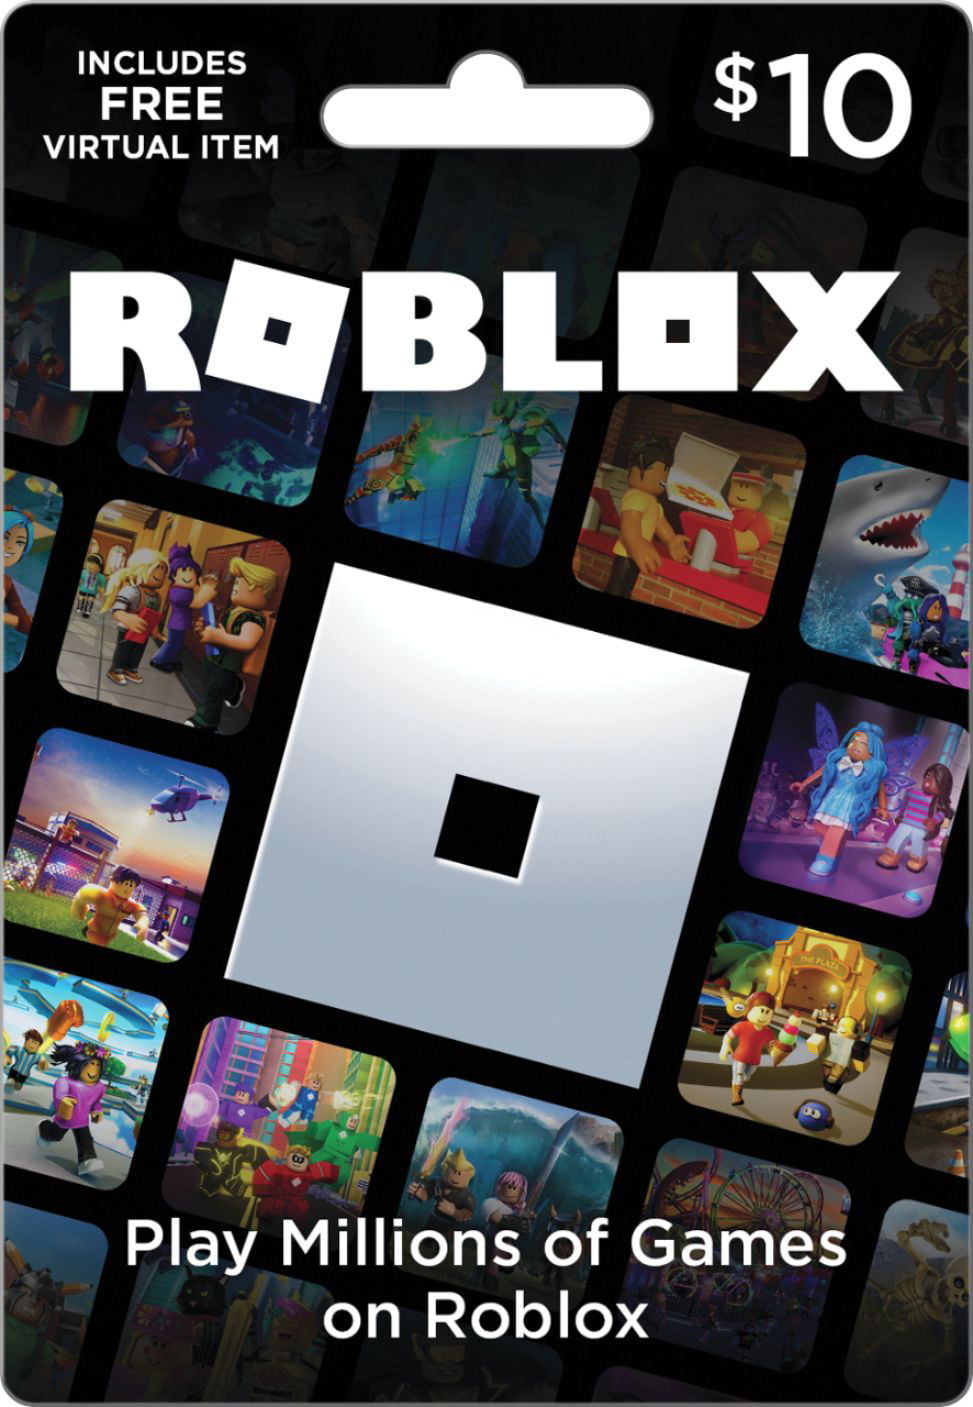 Roblox Nintendo Switch Lite Game Online Discount Shop For Electronics Apparel Toys Books Games Computers Shoes Jewelry Watches Baby Products Sports Outdoors Office Products Bed Bath Furniture Tools Hardware - nintendo switch lite roblox game